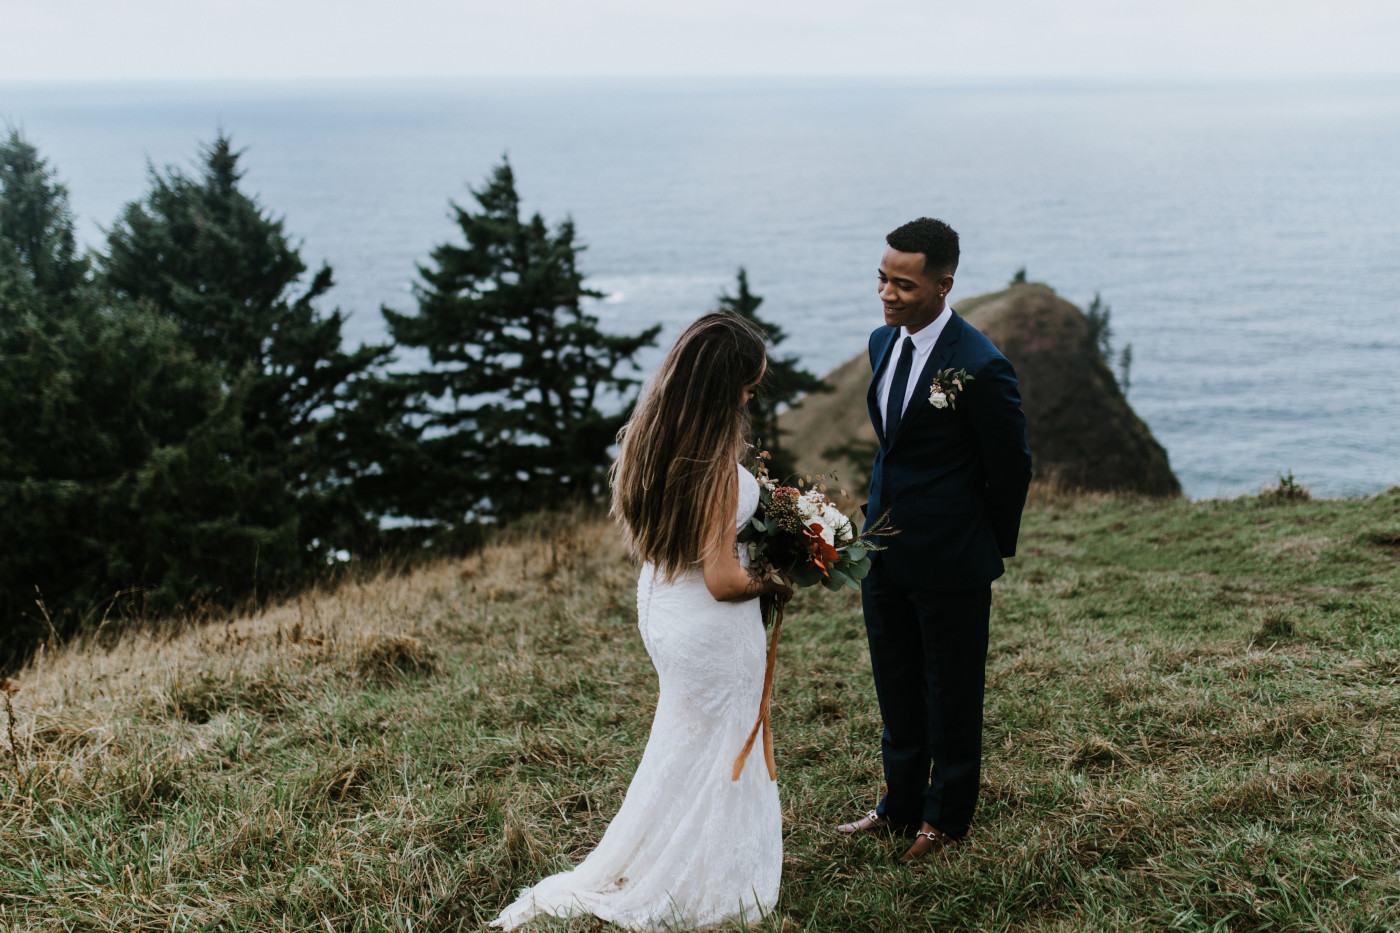 Deandre smiles at Ariana during their elopement. Elopement photography at Mount Hood by Sienna Plus Josh.